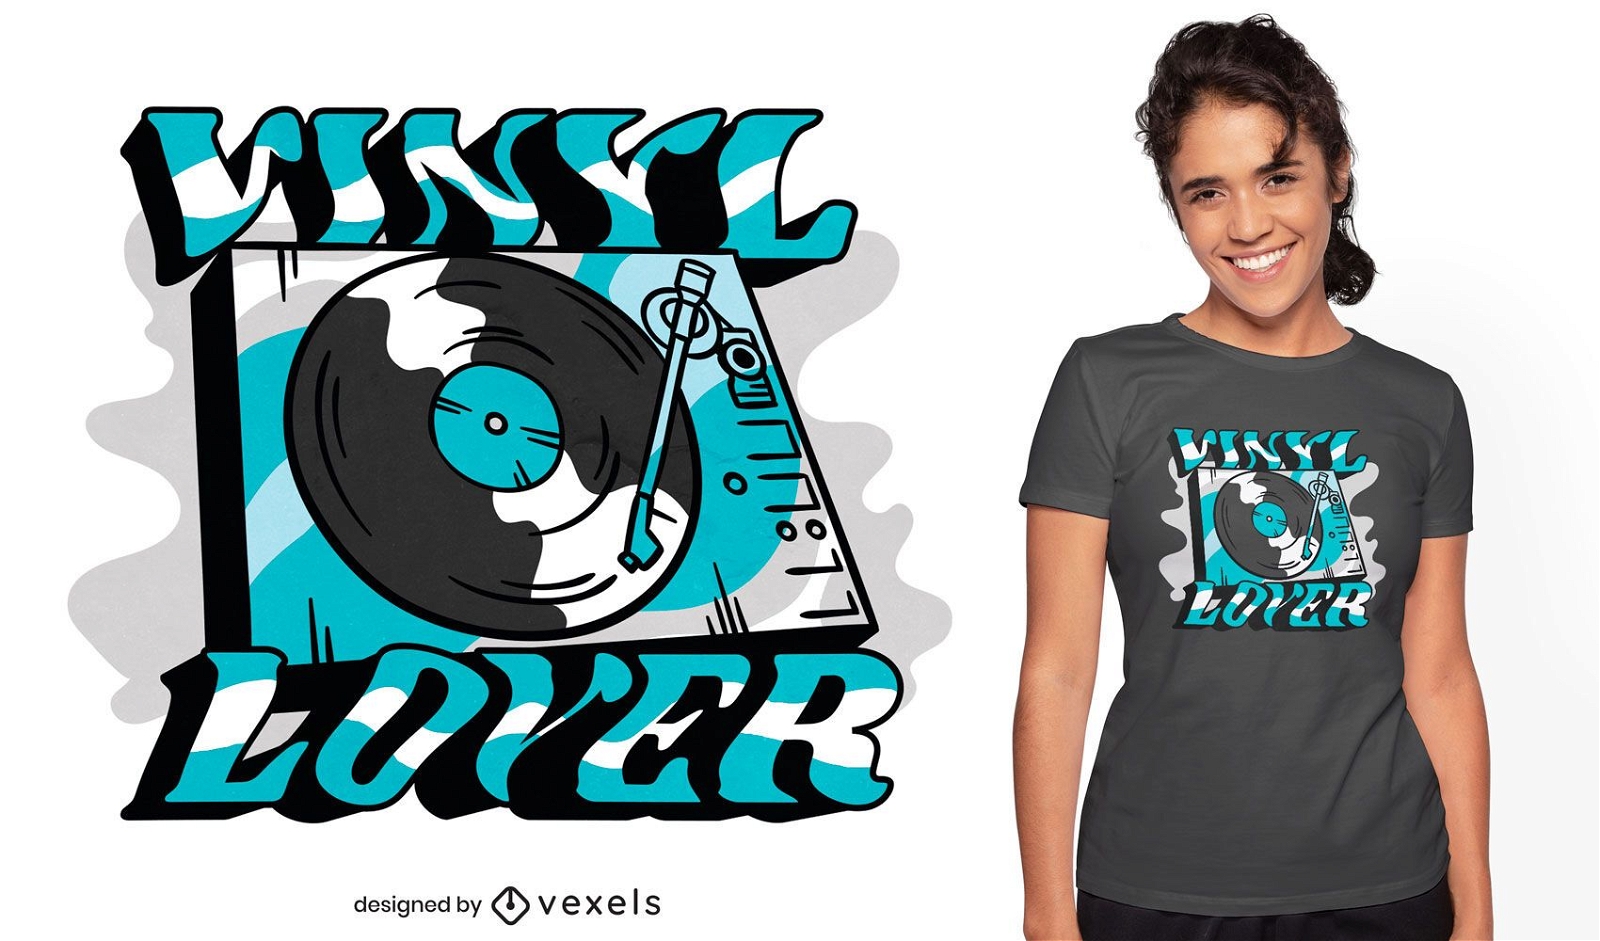 Vinyl record player quote t-shirt design